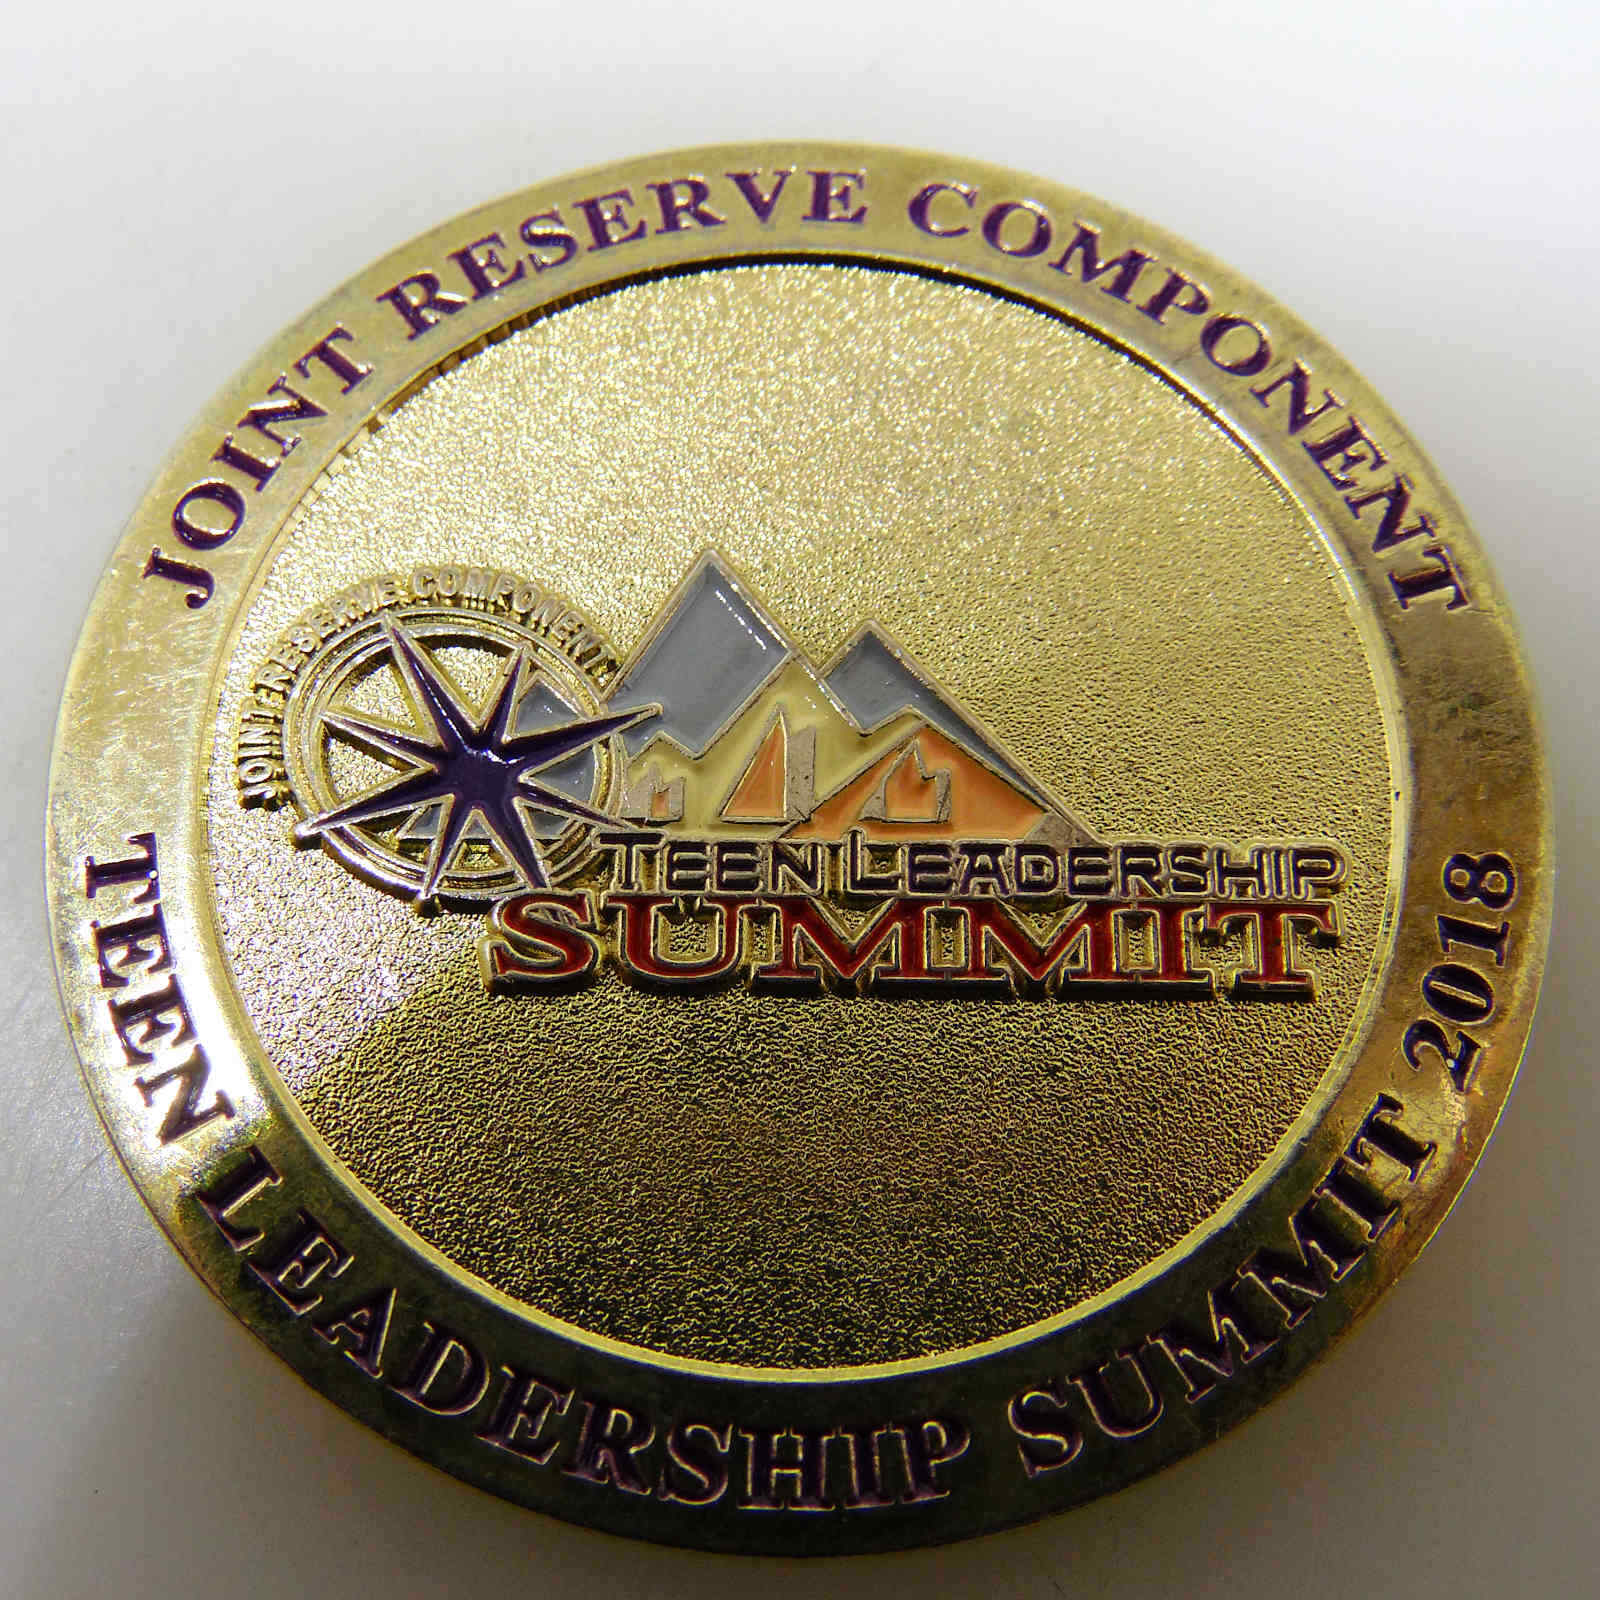 JOINT RESERVE COMPONENT TEEN LEADERSHIP SUMMIT 2018 CHALLENGE COIN